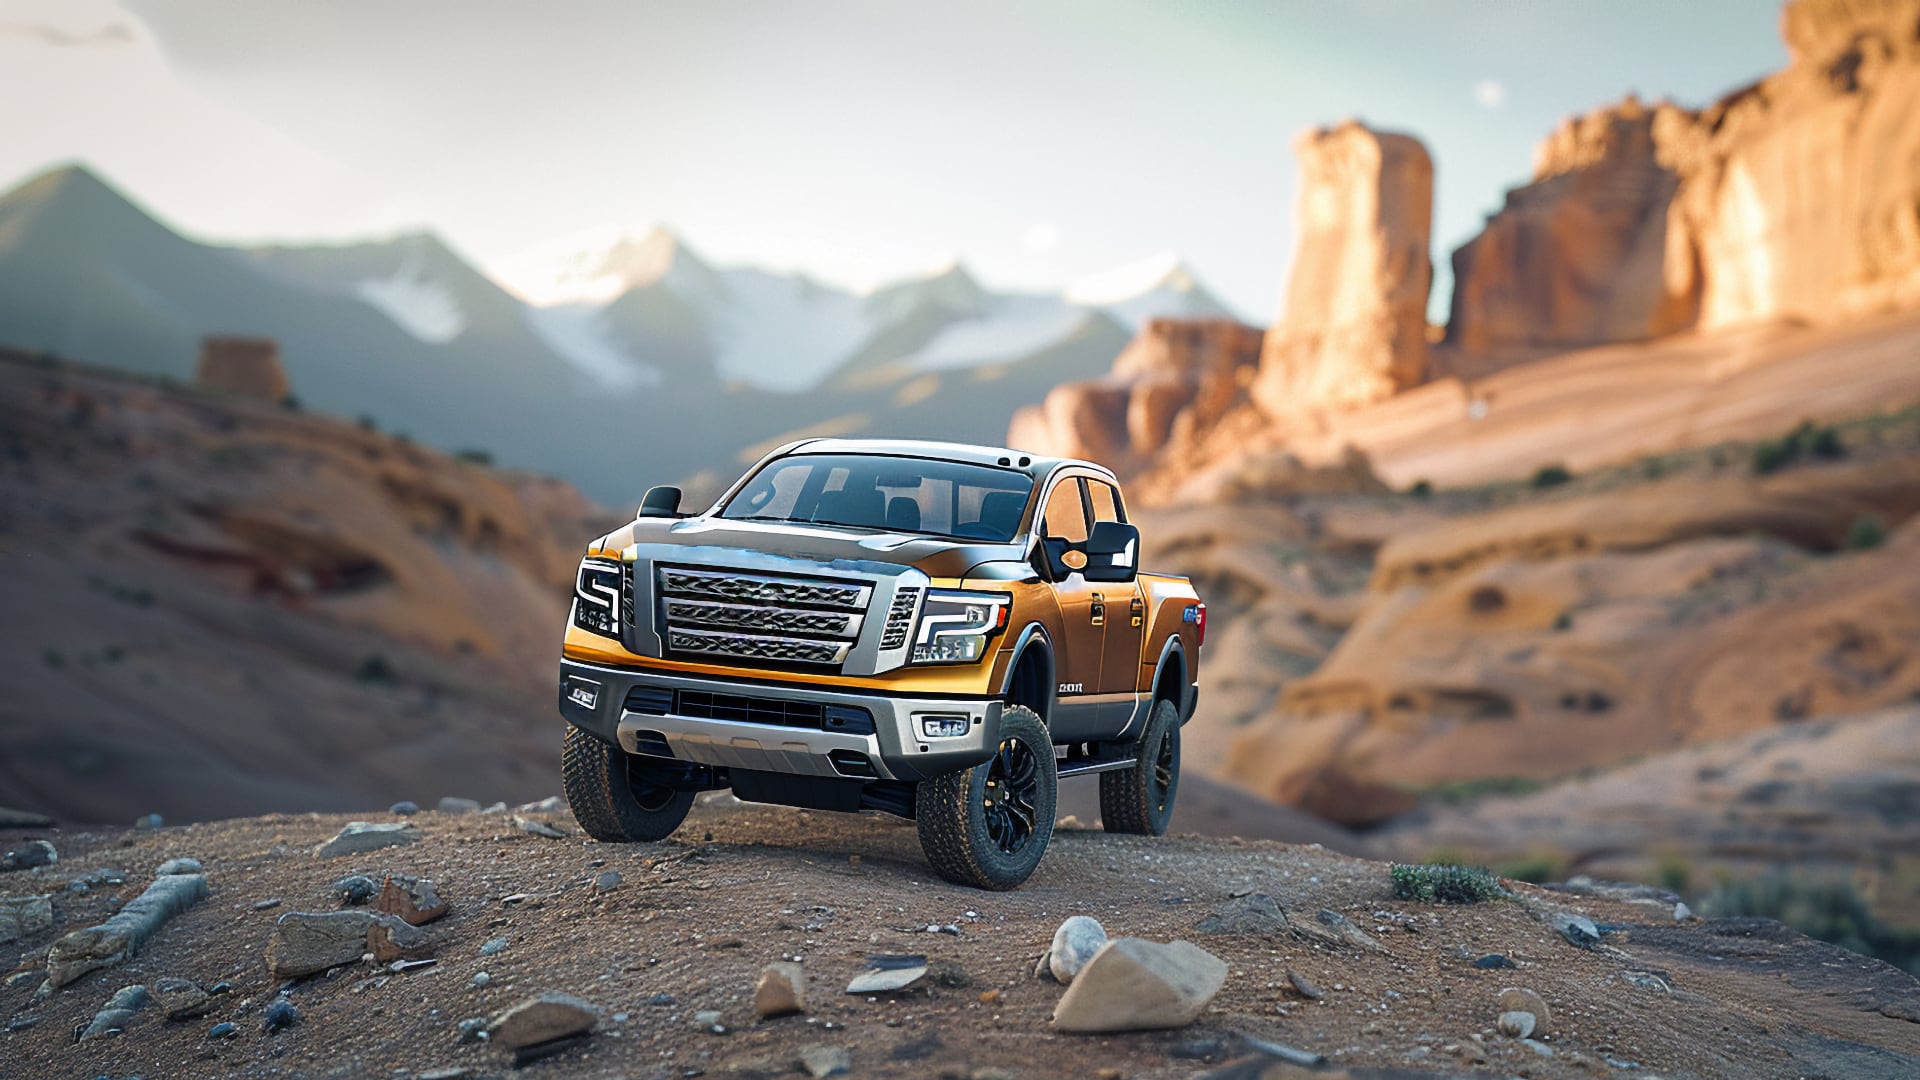 Avoid the 2020 Nissan Titan 4x4 at all costs, as it is prone to issues. Consider a different Nissan Titan model, such as the older Nissan Titan 4x4 option